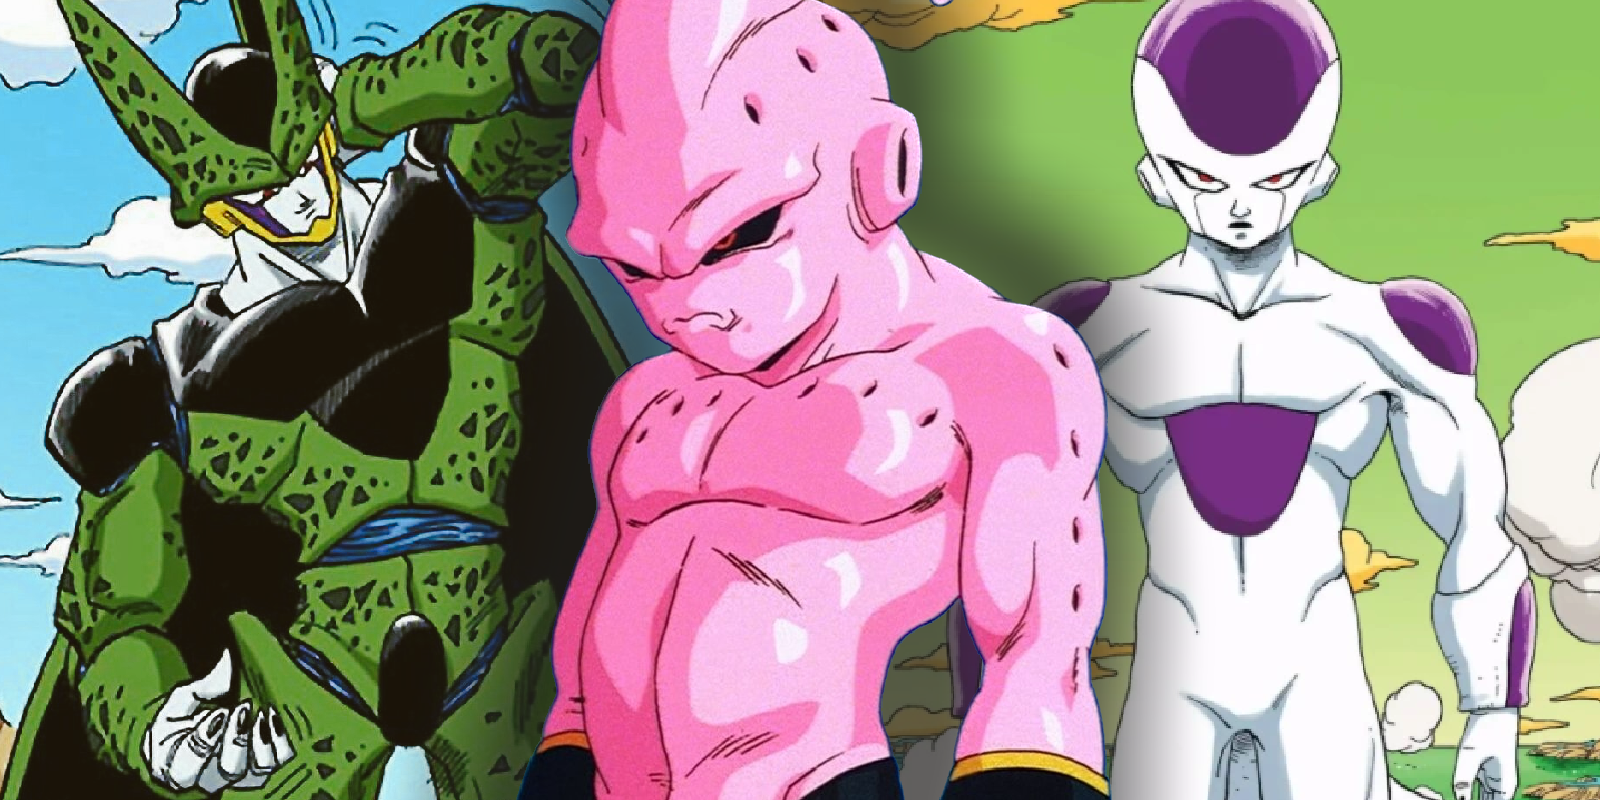 Kid Buu with Perfect Cell and Final Form Frieza from Dragon Ball Z